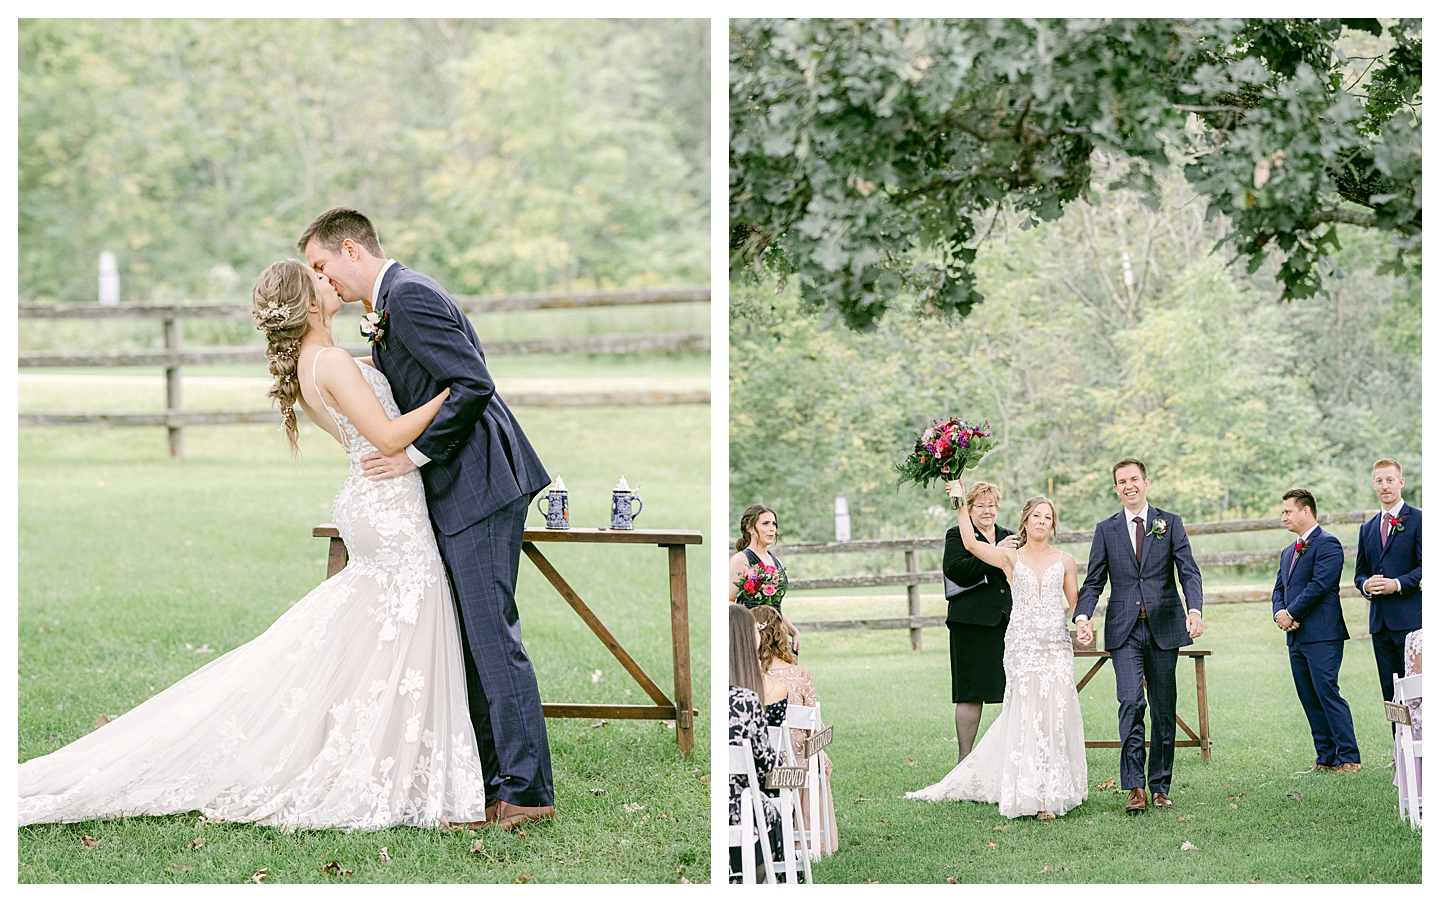 A couples' first kiss at a Mayowood Stone Barn Wedding. Photo by Kayla Lee.